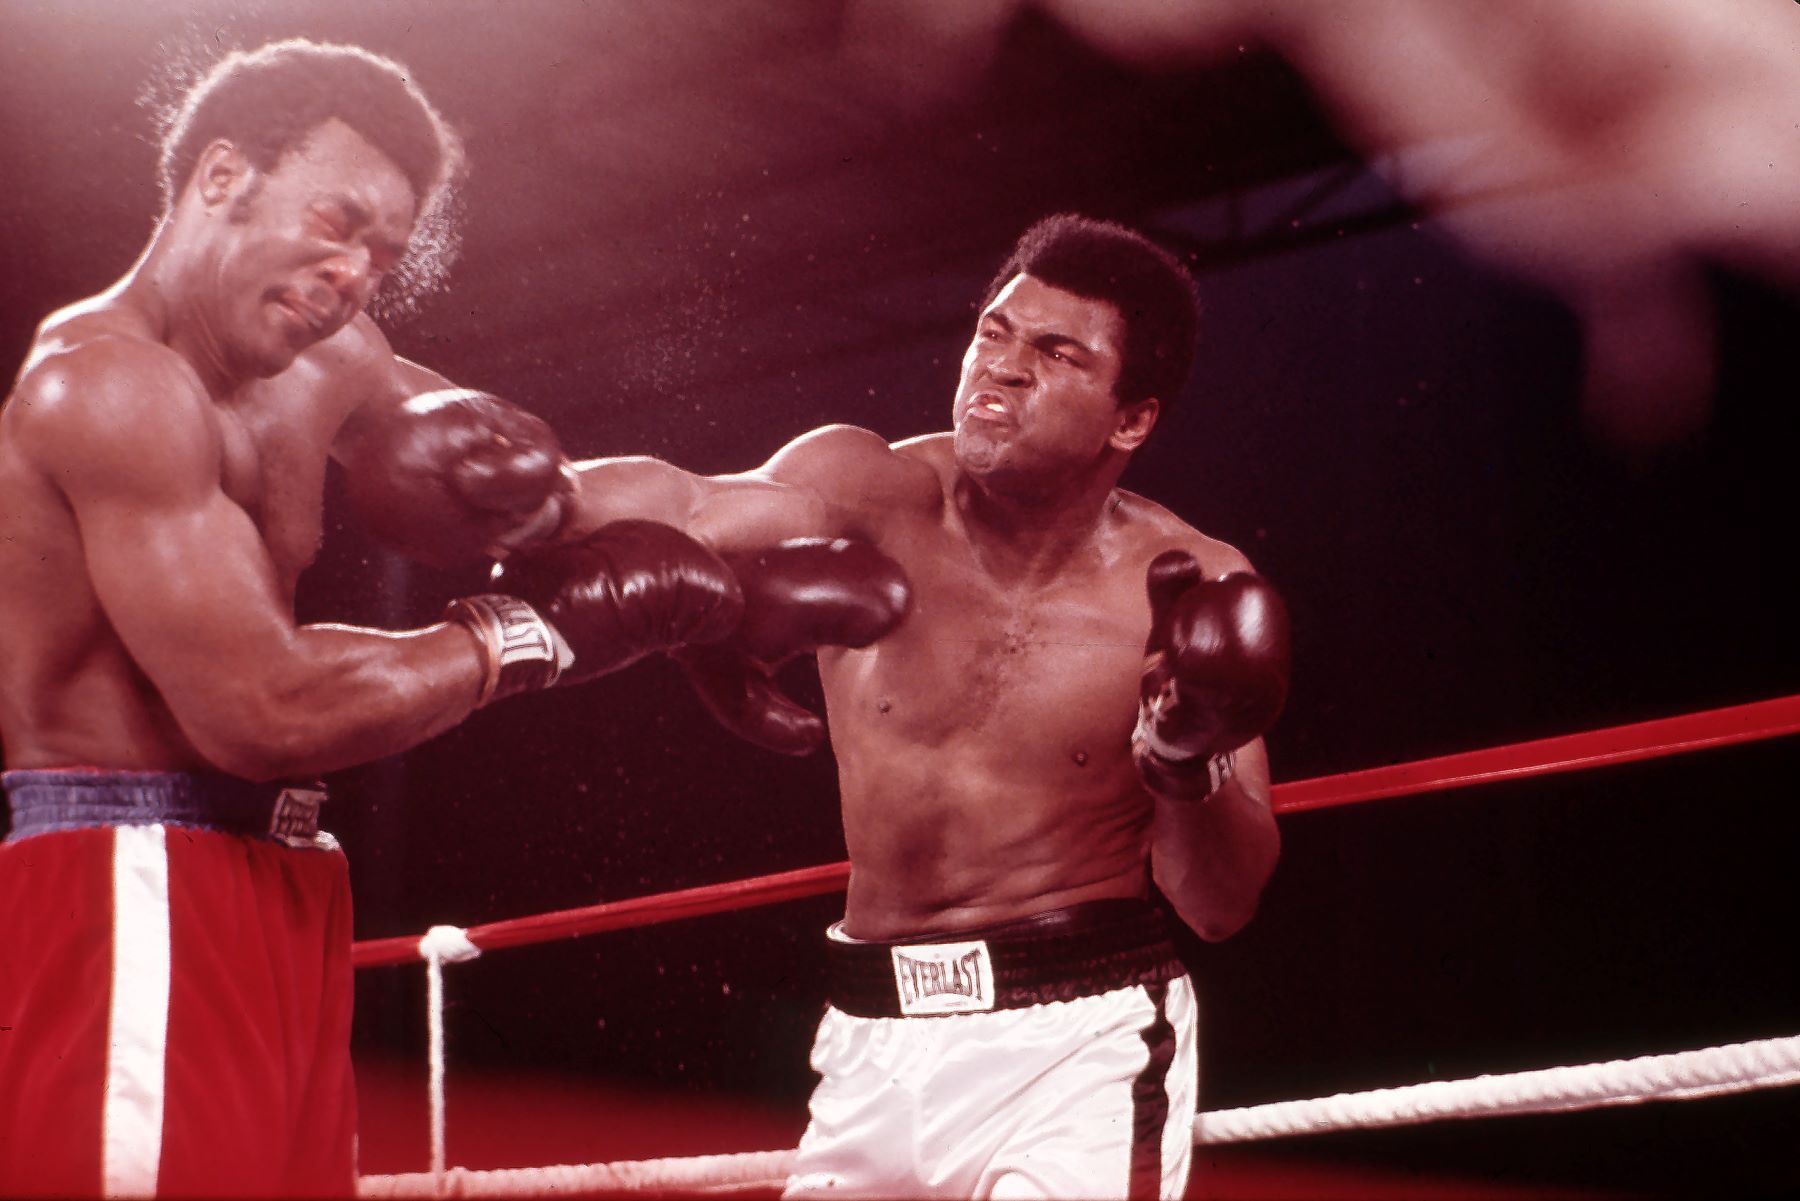 George Foreman vs Muhammed Ali during "The Rumble in the Jungle" ceavyweight championship boxing match on October 30, 1974 in Kinshasa, Zaire (now the Democratic Republic of Congo)